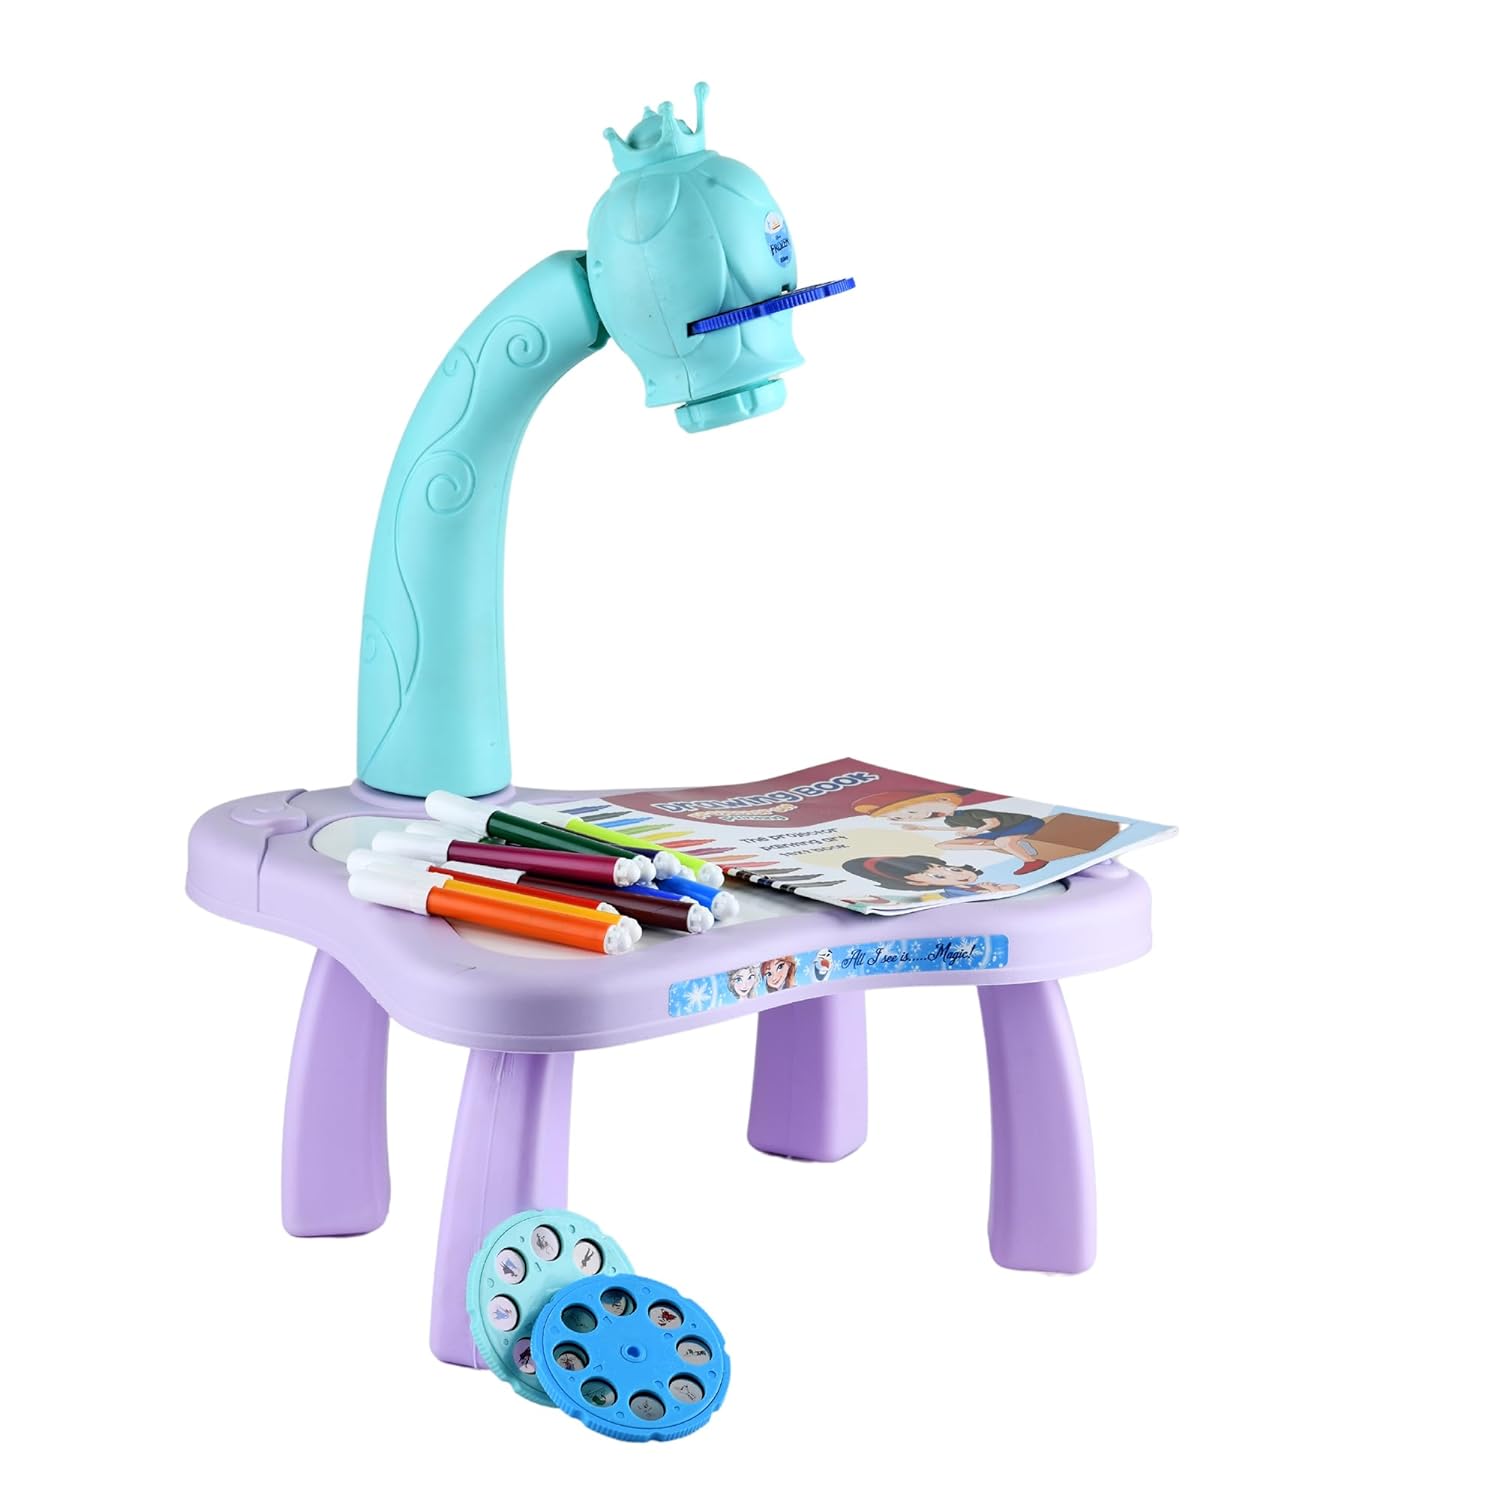 Disney Frozen Drawing Kids Projector Set Painting Desk Table with Patterns & Colorful Water Pens Table Lamp for Better Creativity & Education Board Game for Kids